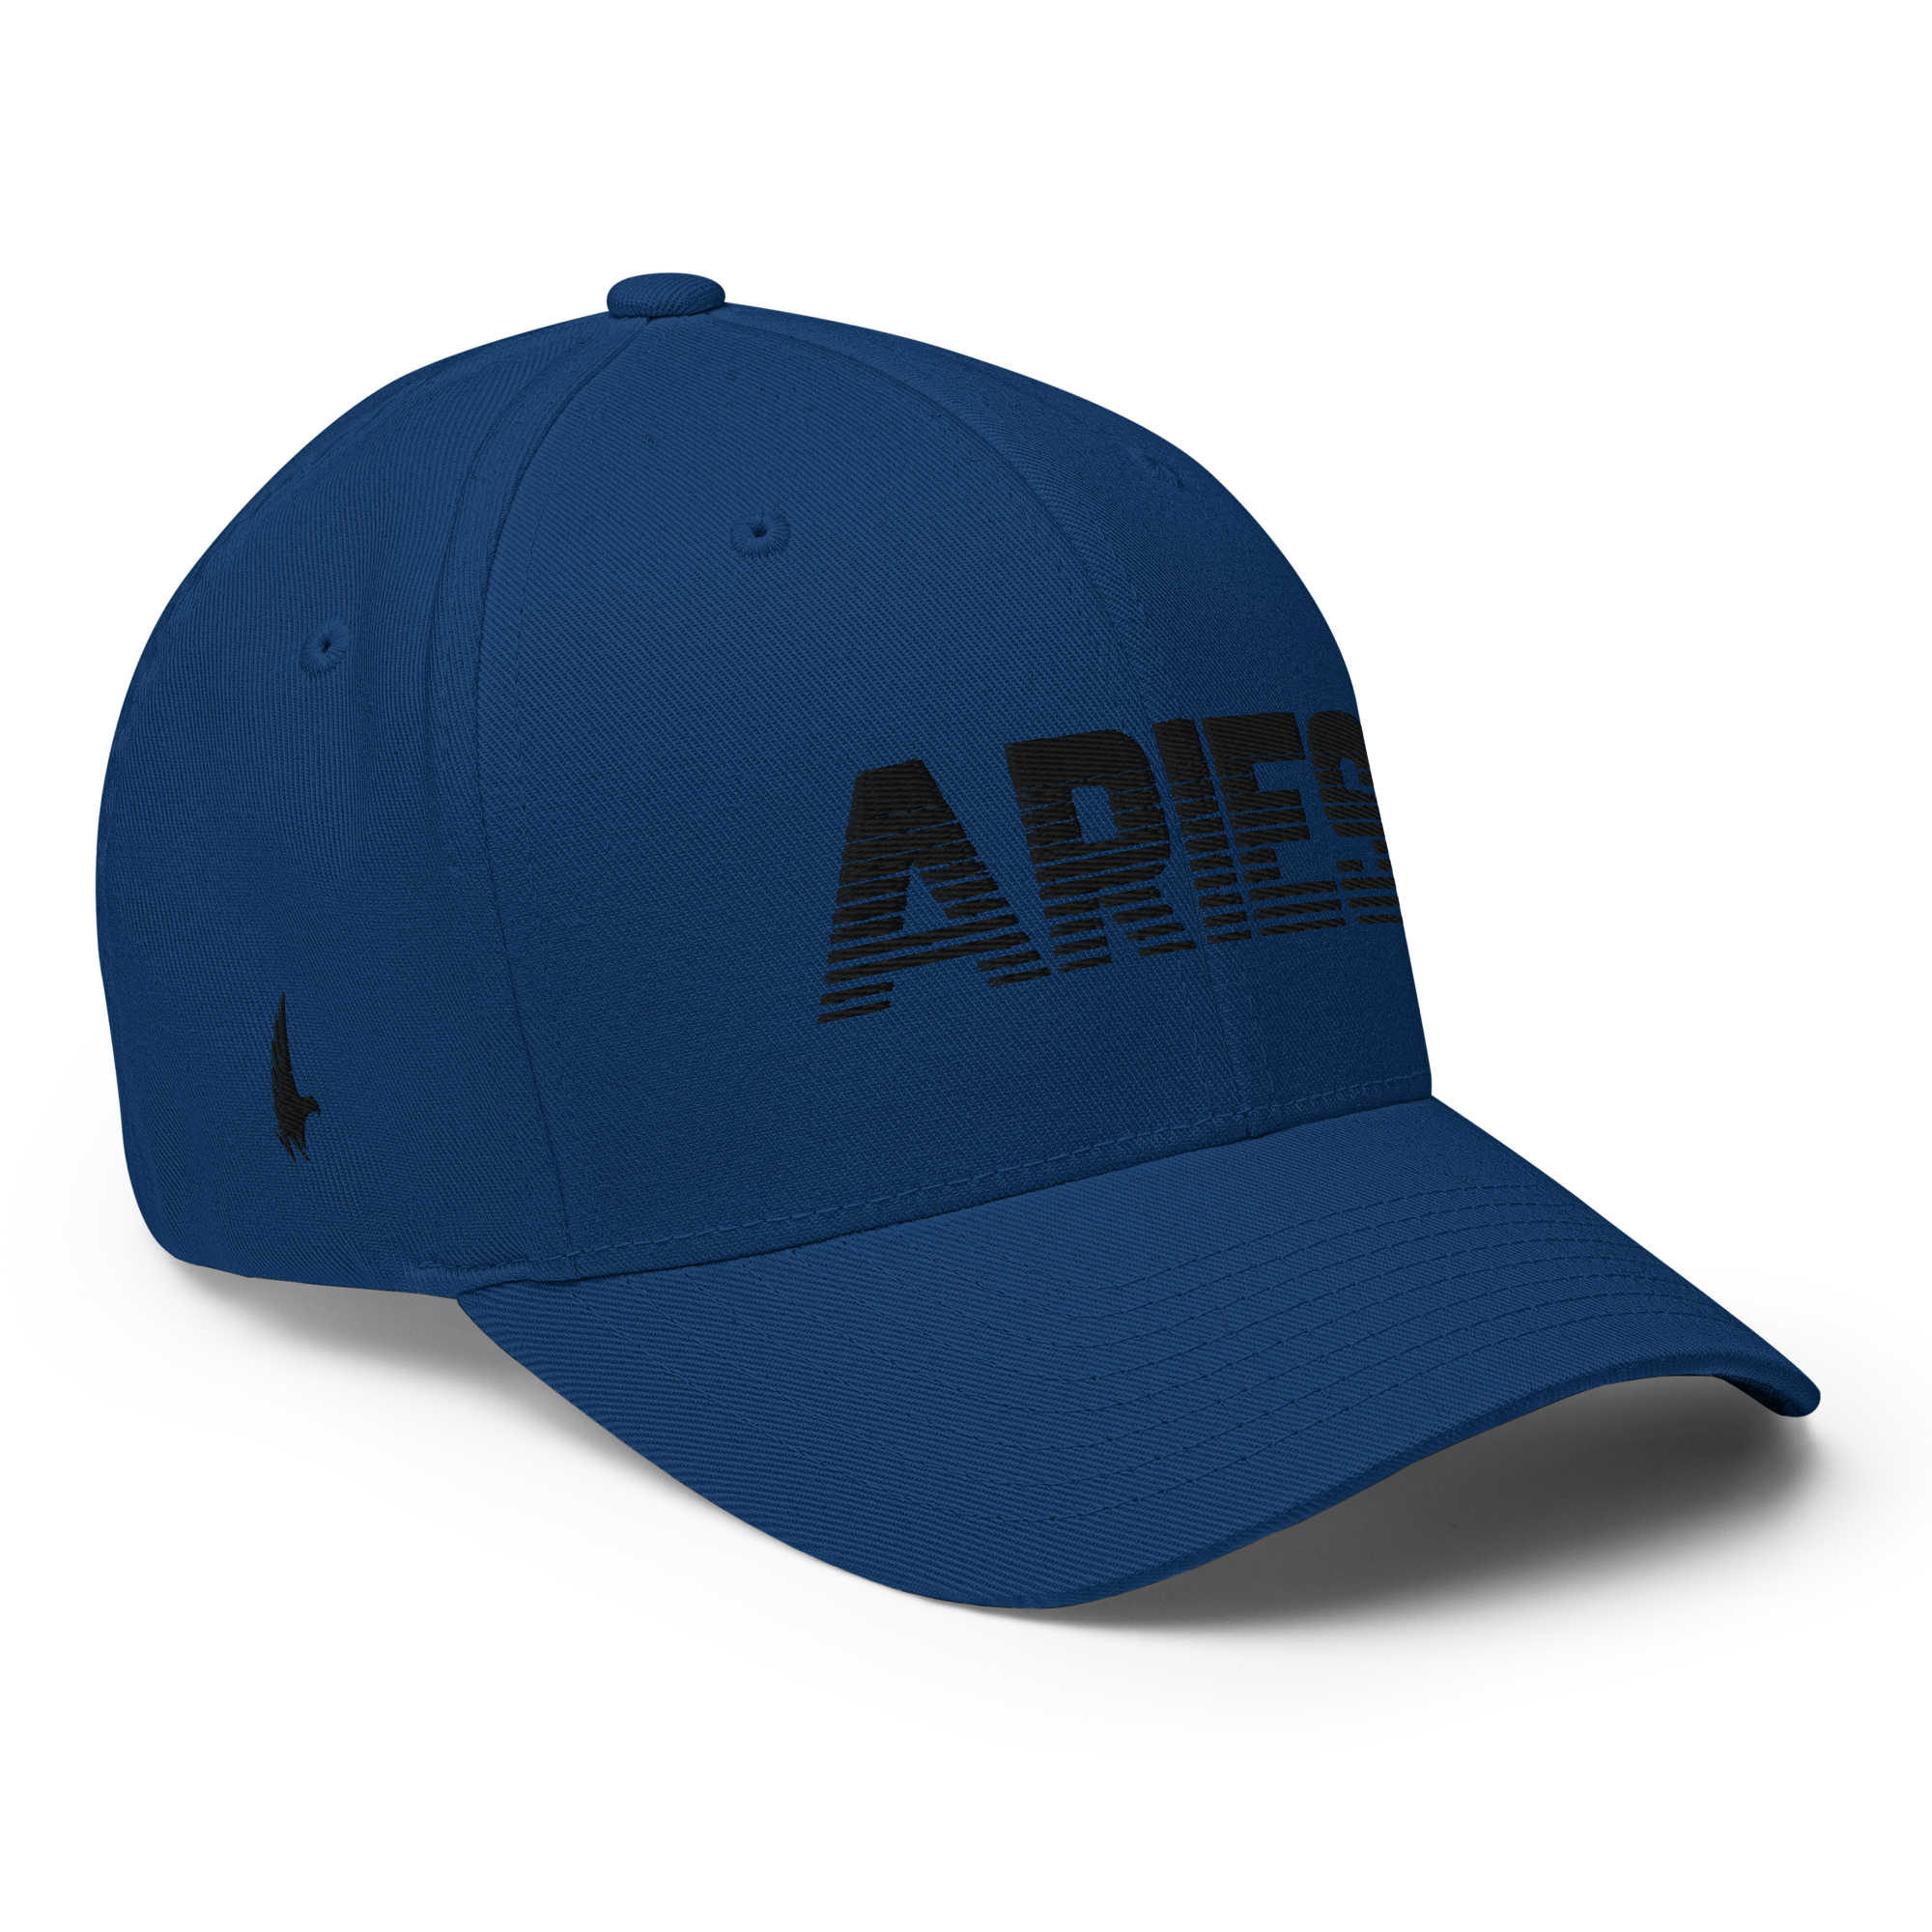 Aries Fitted Hat - Blue/Black Fitted - Loyalty Vibes